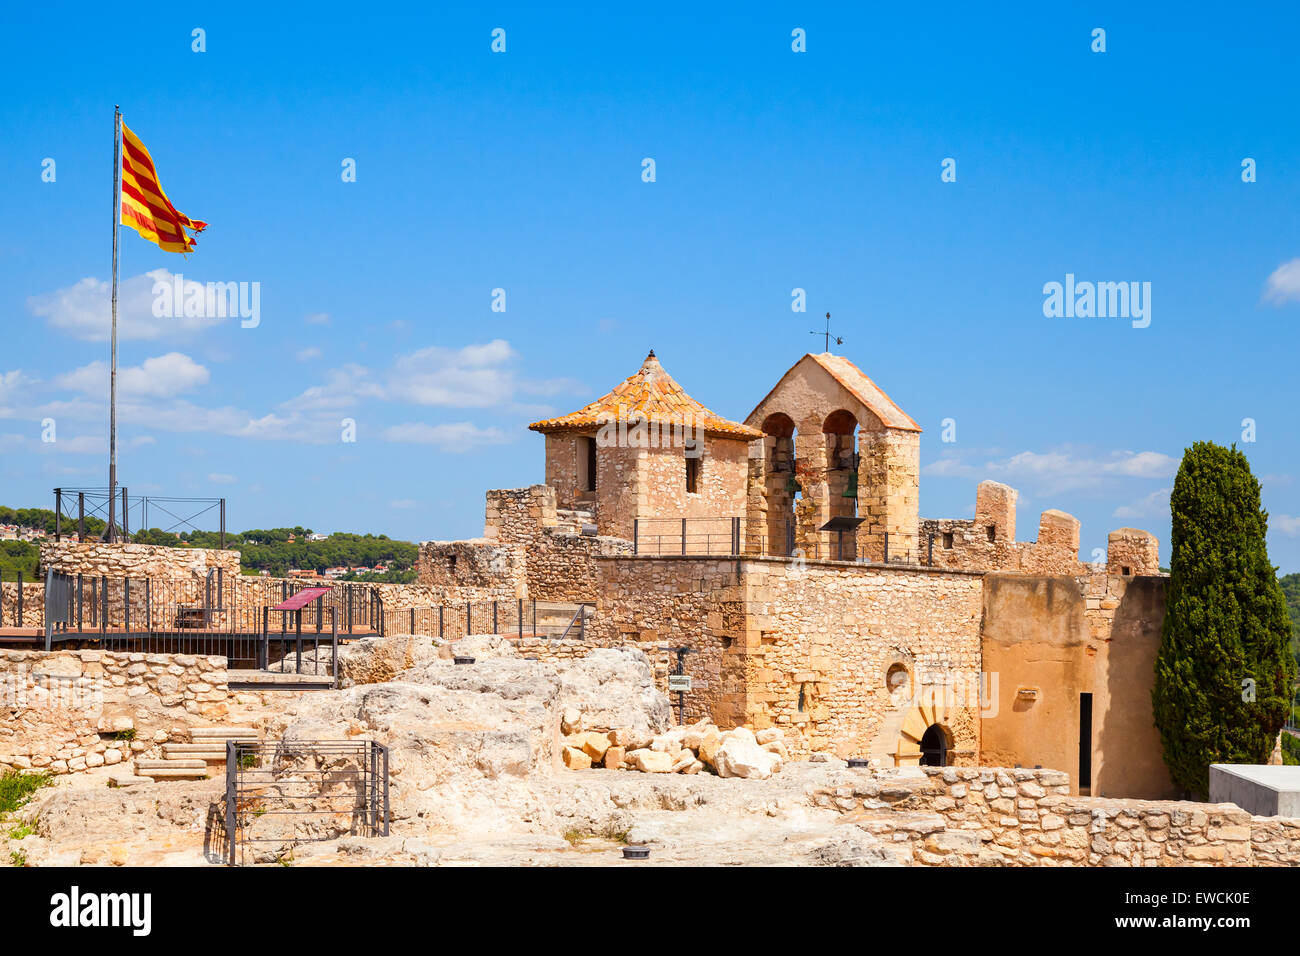 Medieval castle in Calafell town, Spain. Stone towers, walls and striped flag of Catalonia Stock Photo